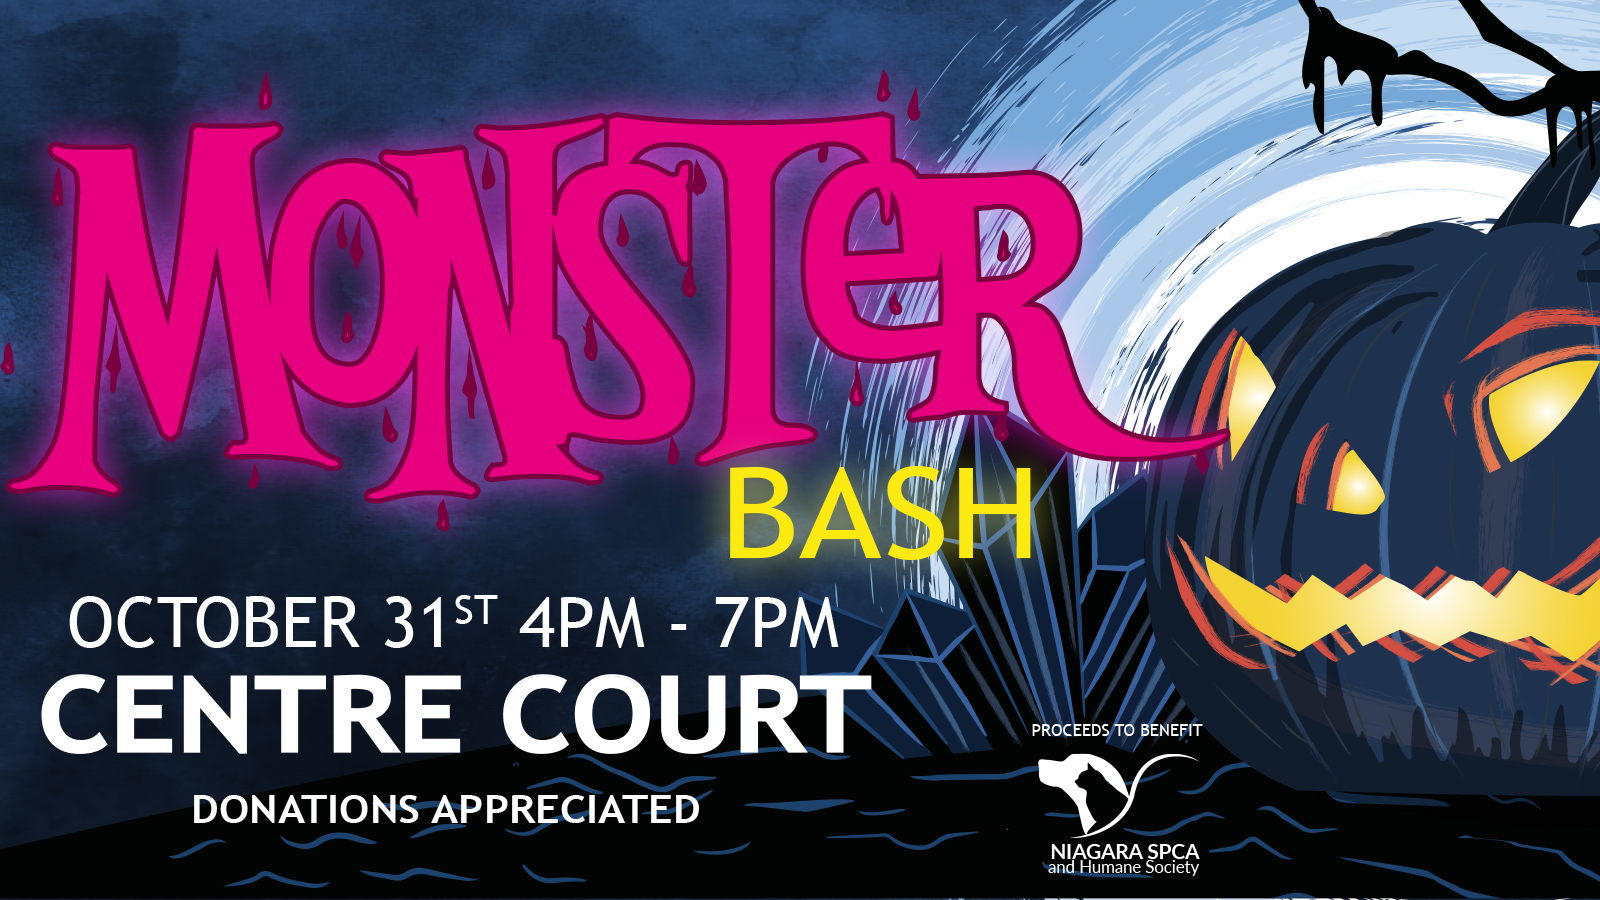 Seaway Mall & SPCA to Host Halloween Monster Bash and Trick-or-Treating